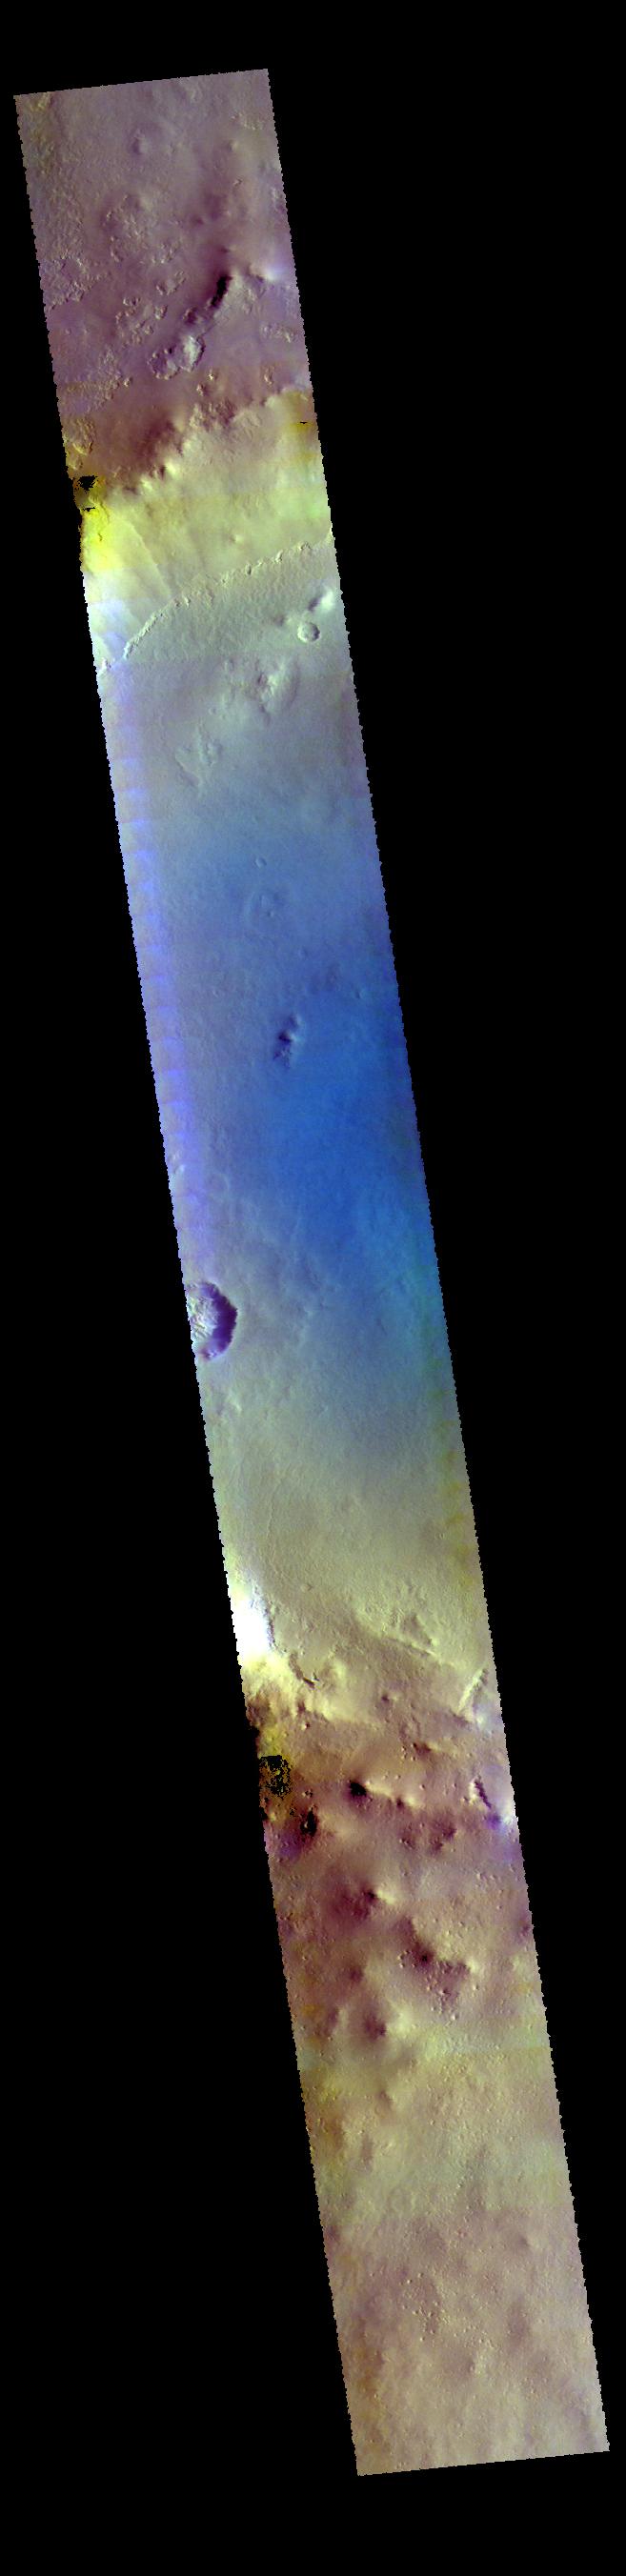 PIA22734: Milankovic Crater - False Color